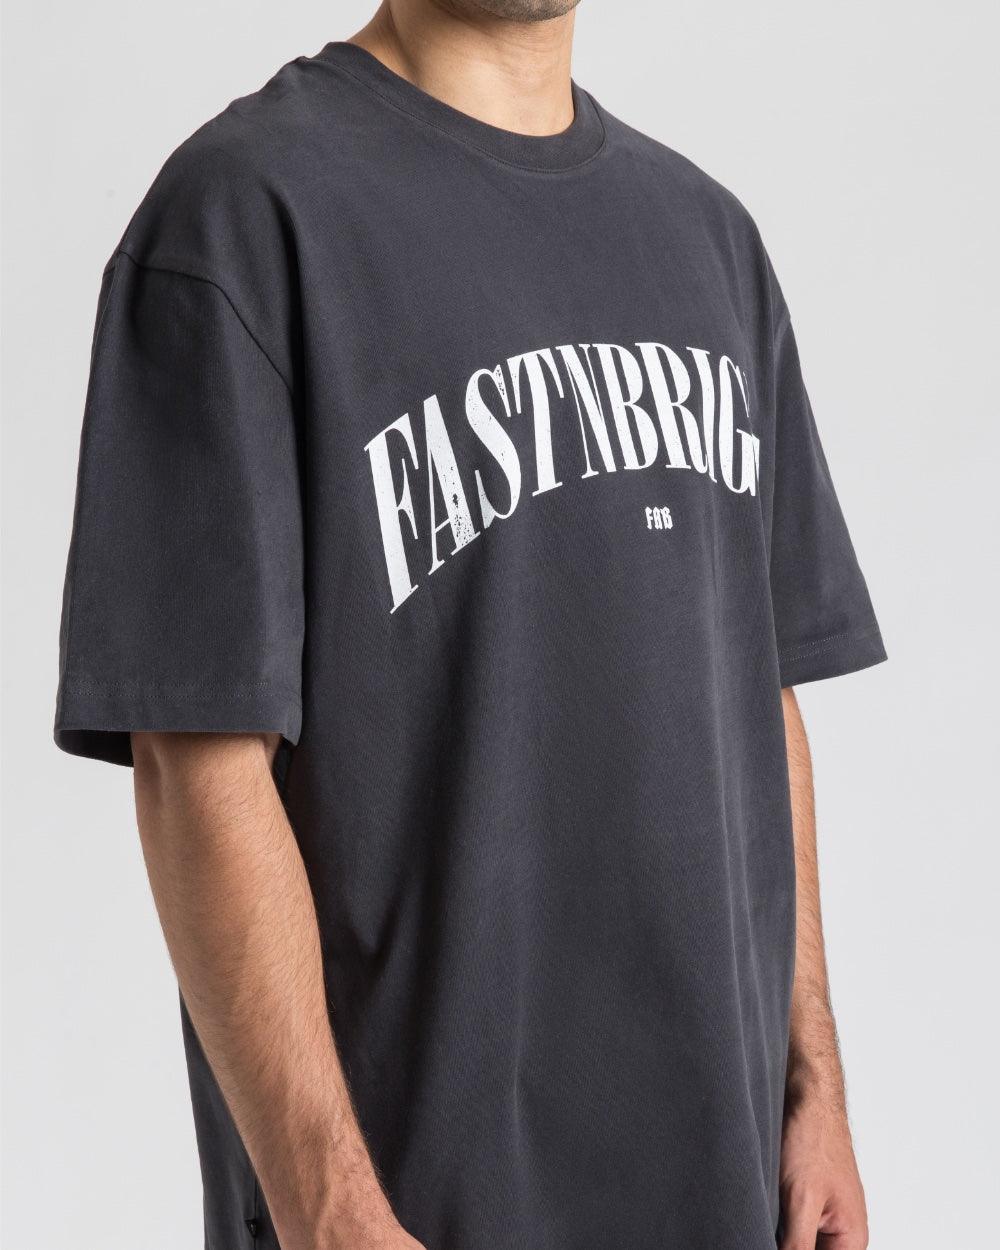 FASTNBRIGHT Tee - FAST AND BRIGHT